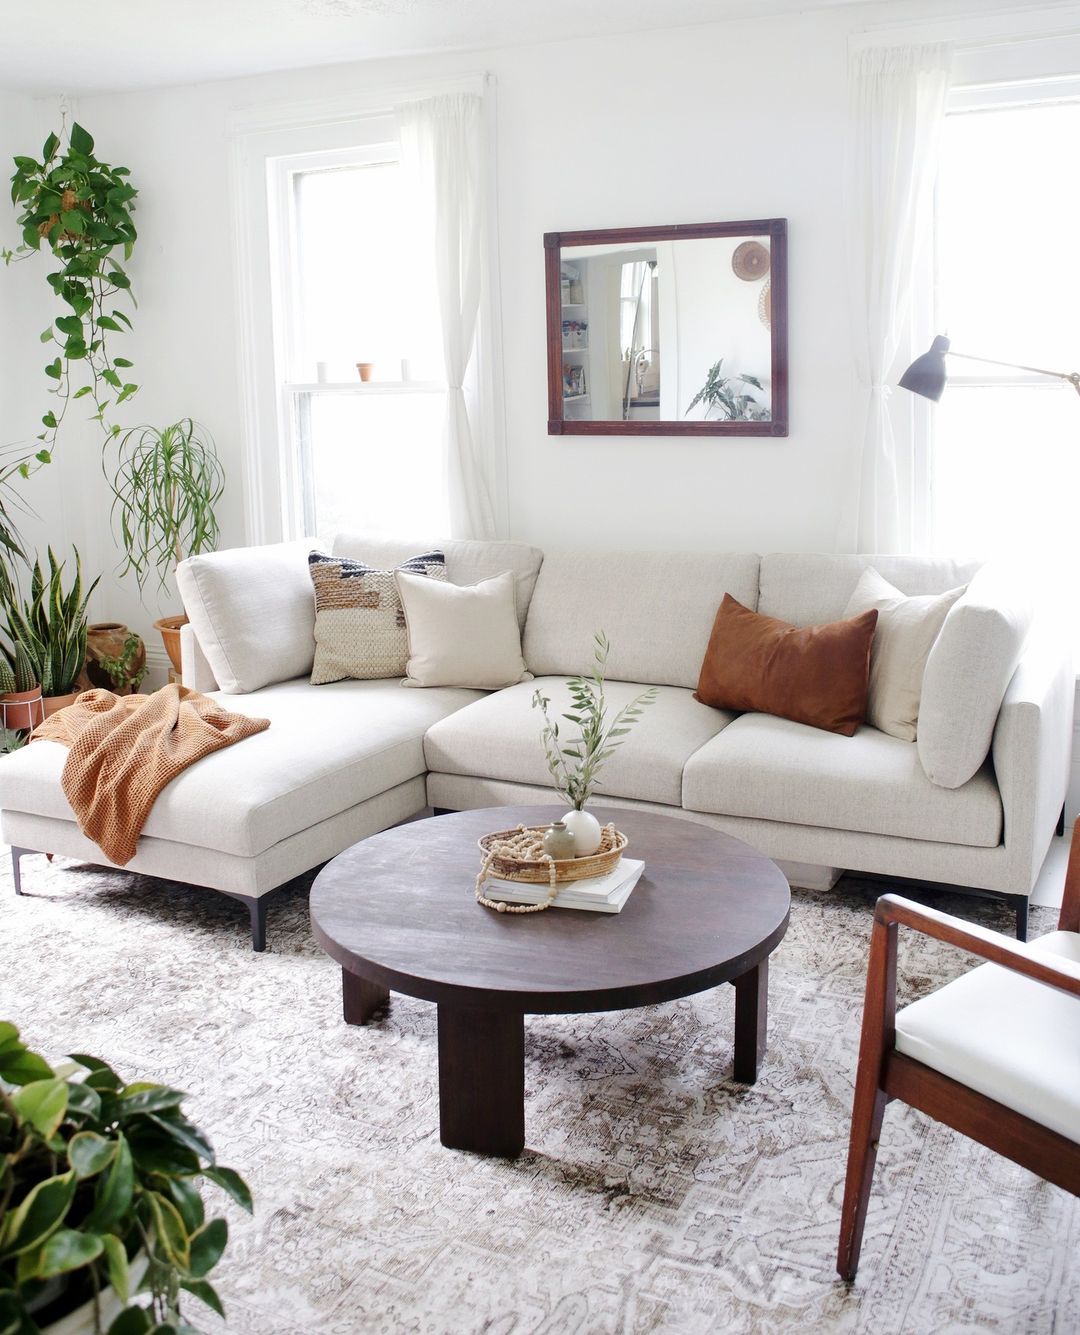 A Guide to Living Room Interior Design Styles